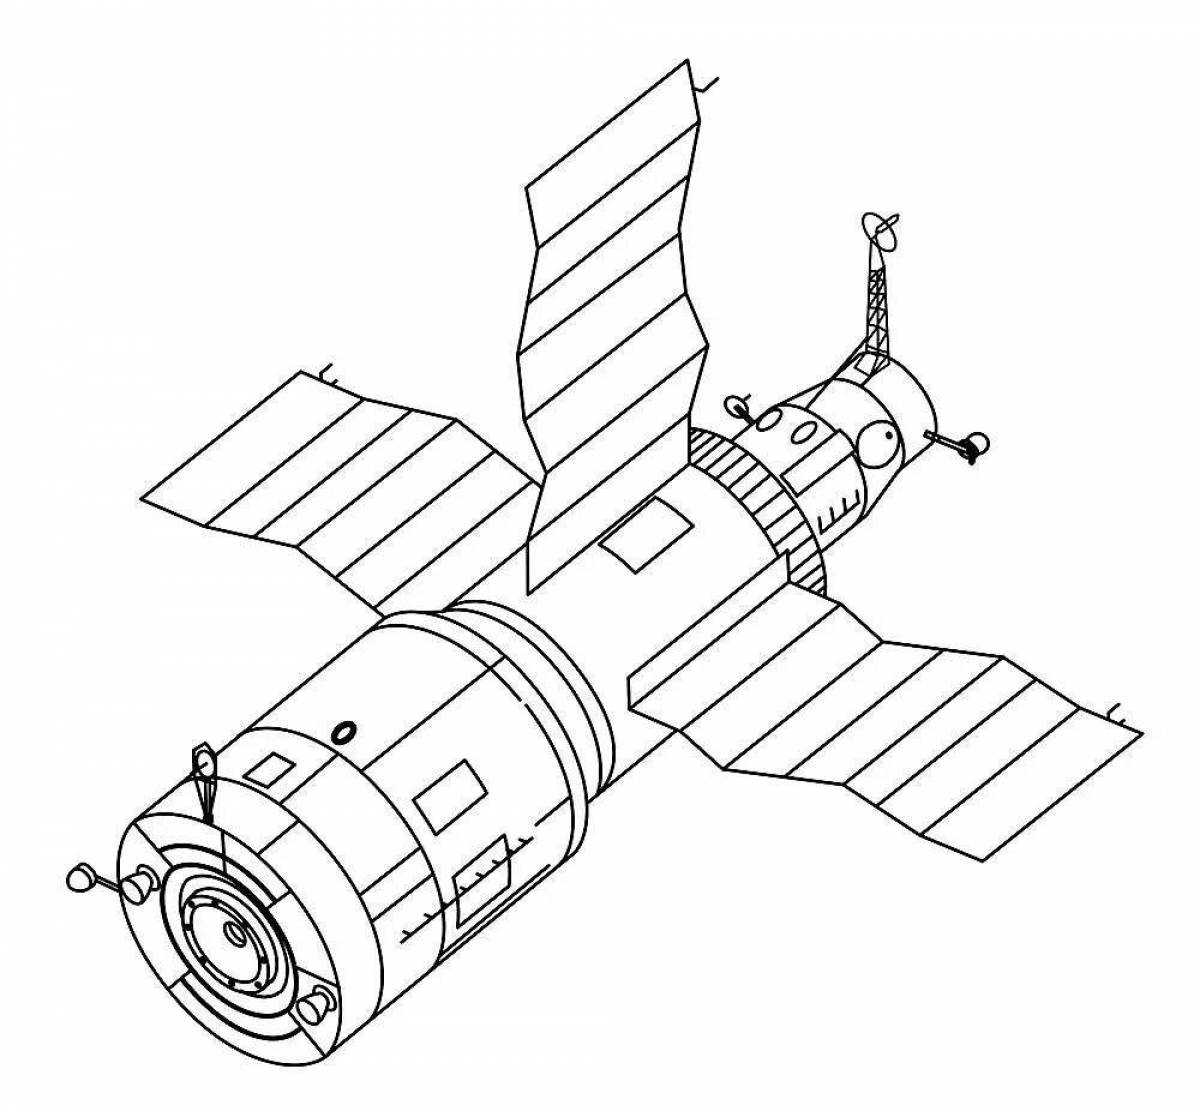 Tempting space station coloring page